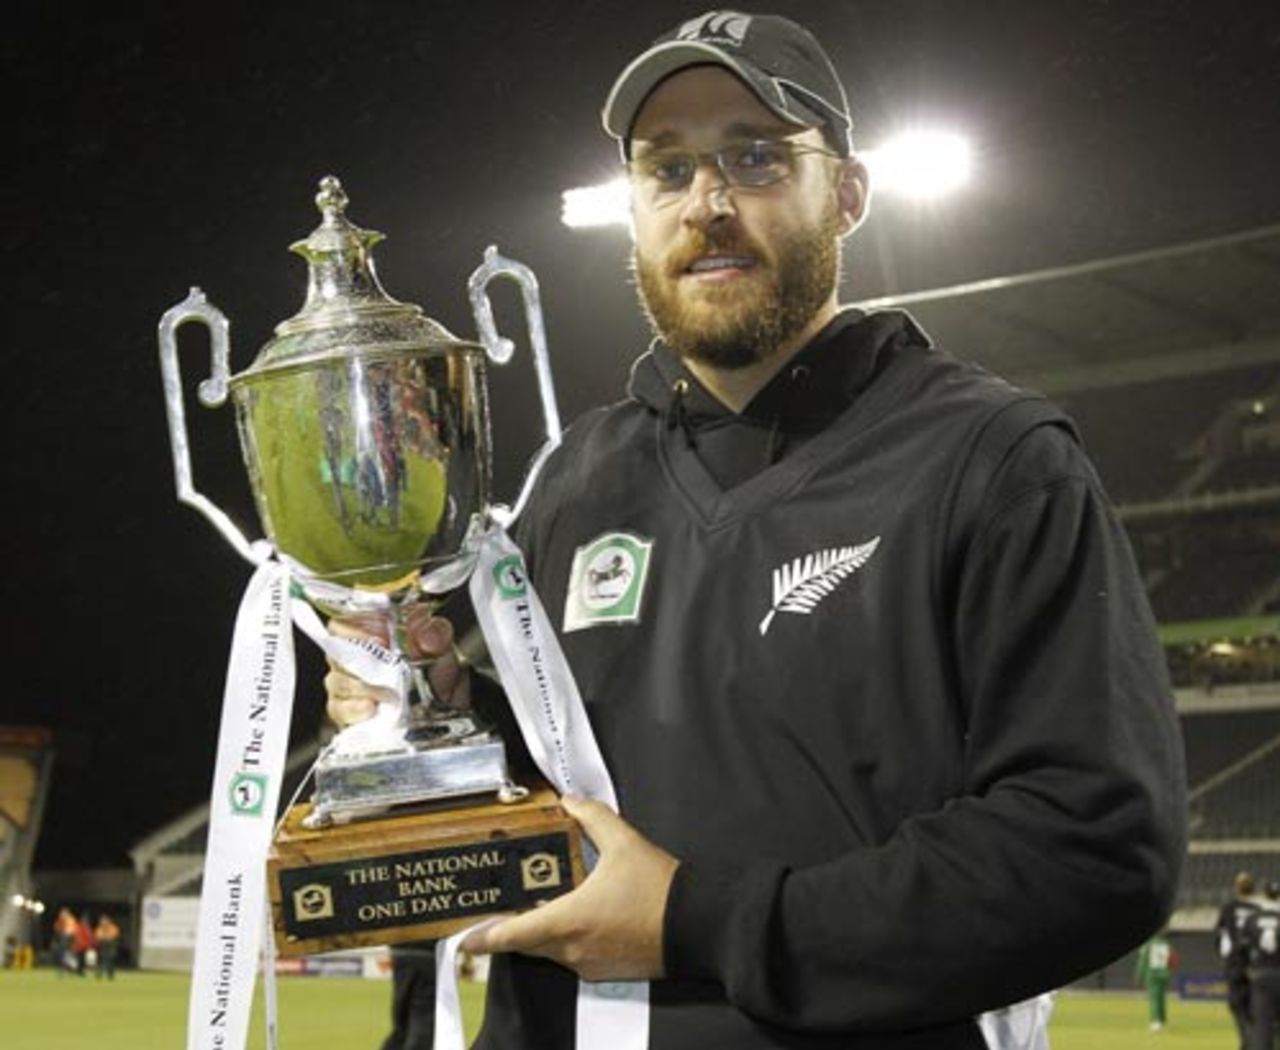 Daniel Vettori with the trophy after winning the series 3-0, New Zealand v Bangladesh, 3rd ODI, Christchurch, February 11, 2010